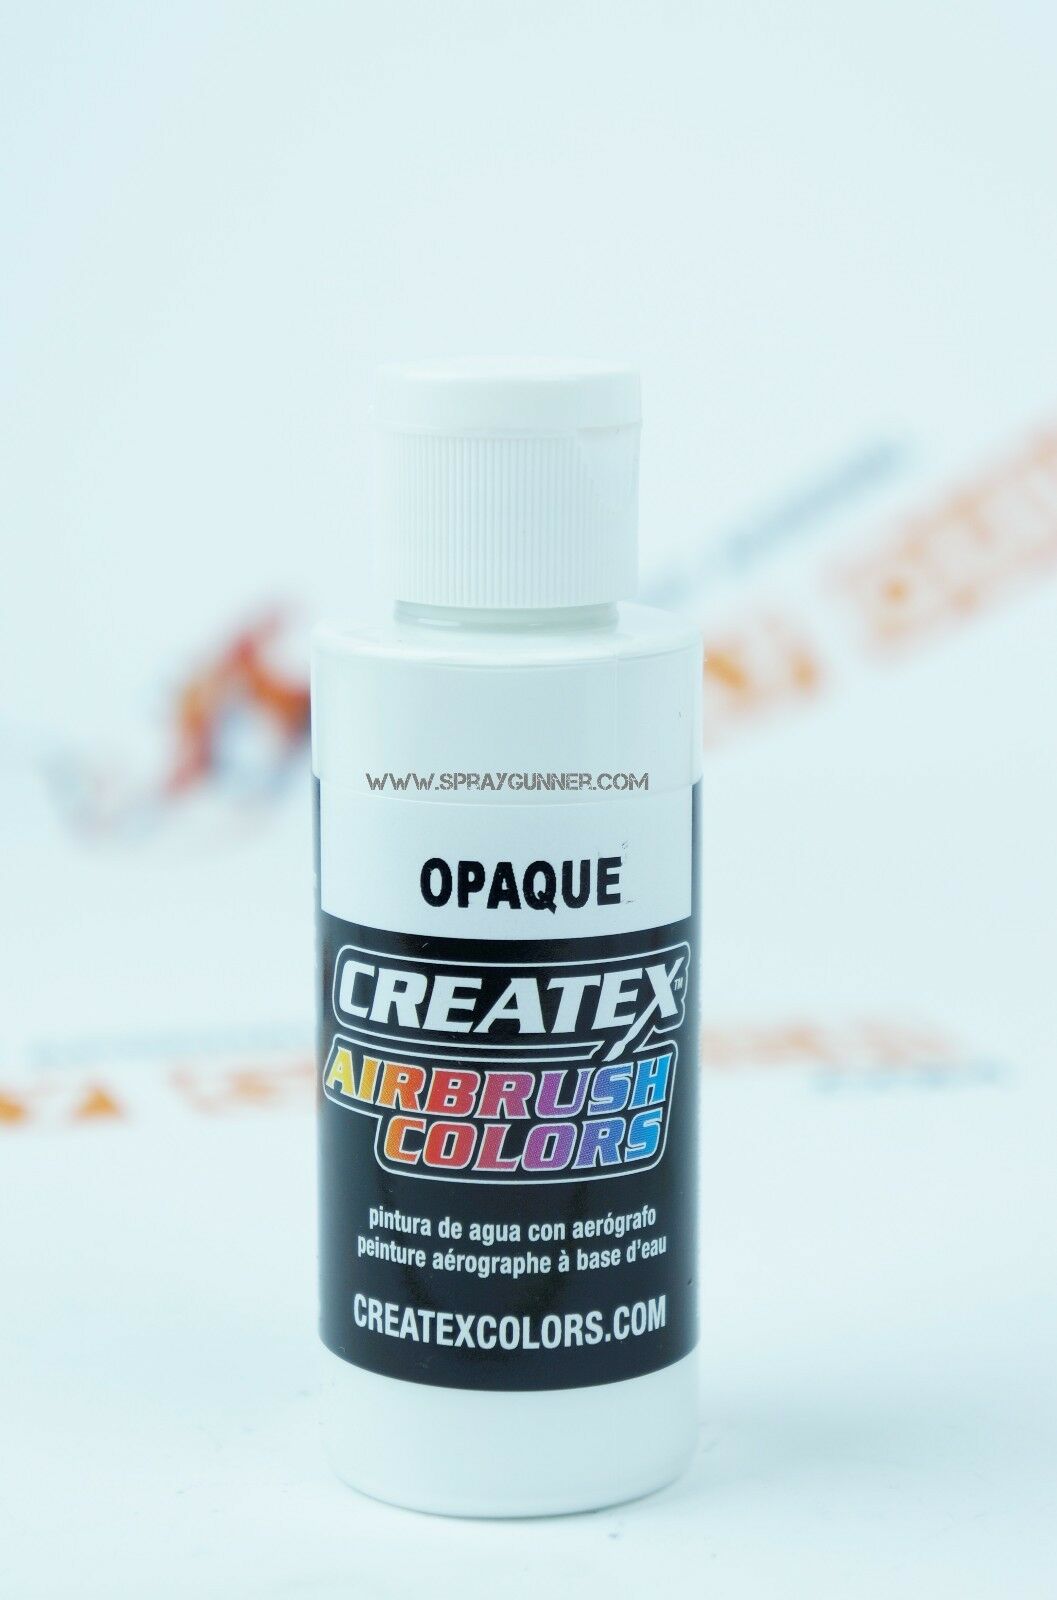 Createx Airbrush Colors 5212 Opaque White 4oz. Water-based Airbrushing Paint